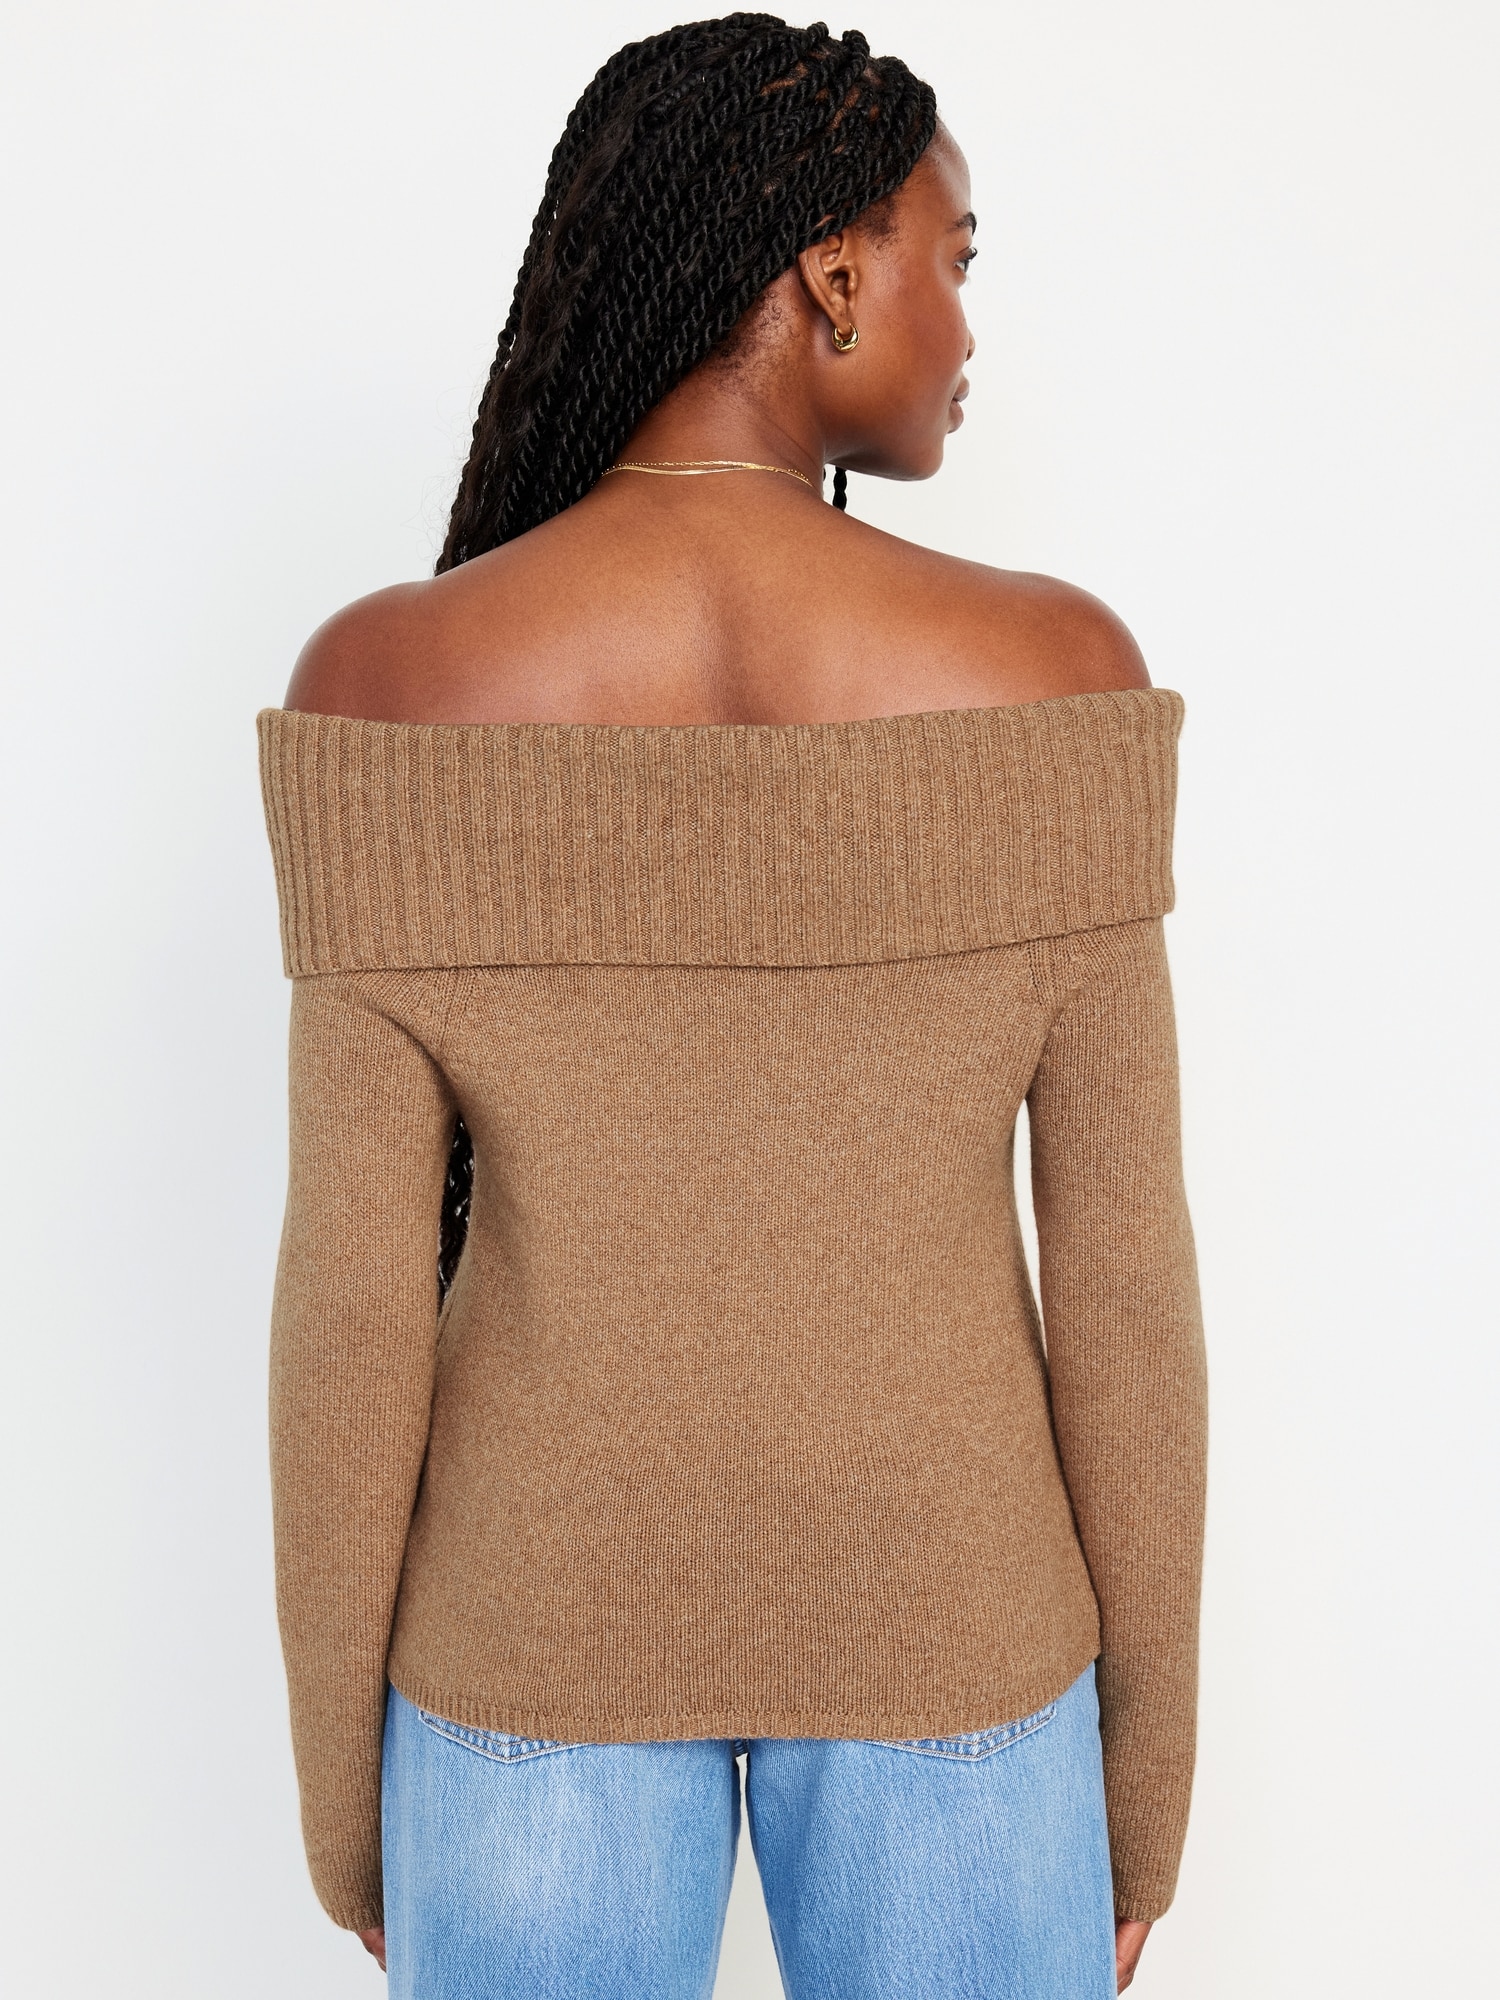 SoSoft Off-the-Shoulder Sweater for Women | Old Navy